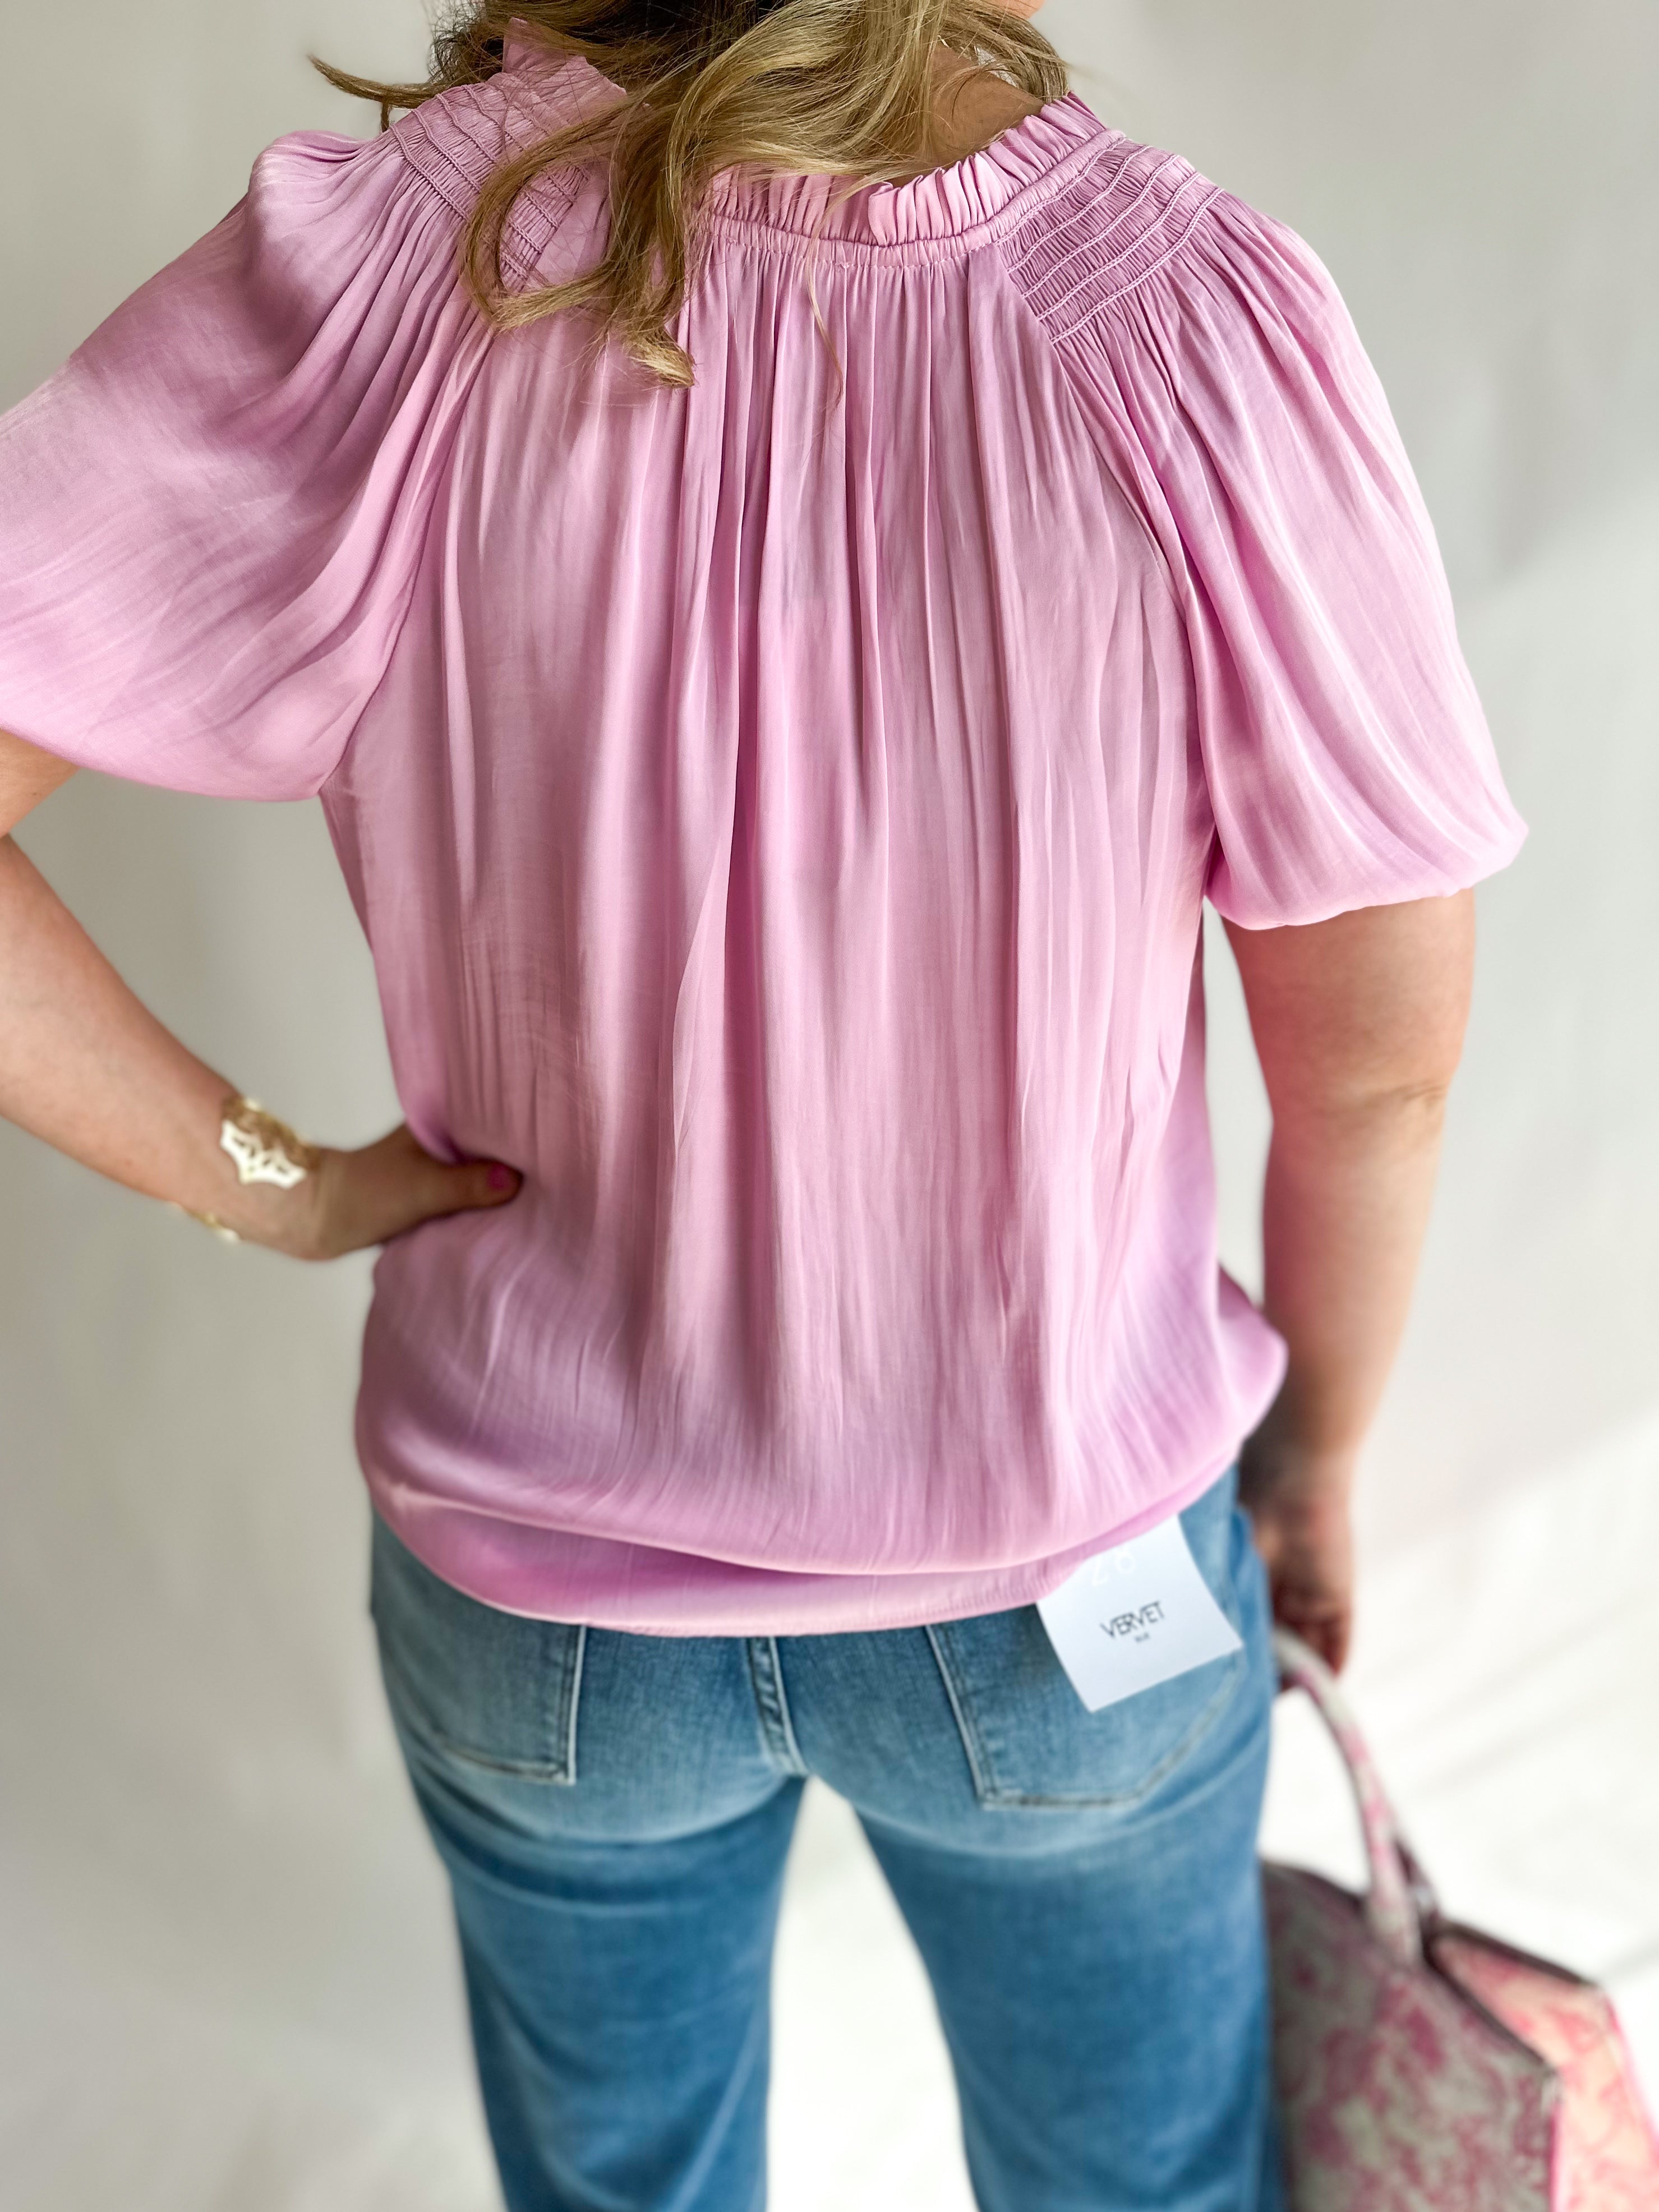 Pastel Pink Blouse-200 Fashion Blouses-CURRENT AIR CLOTHING-July & June Women's Fashion Boutique Located in San Antonio, Texas